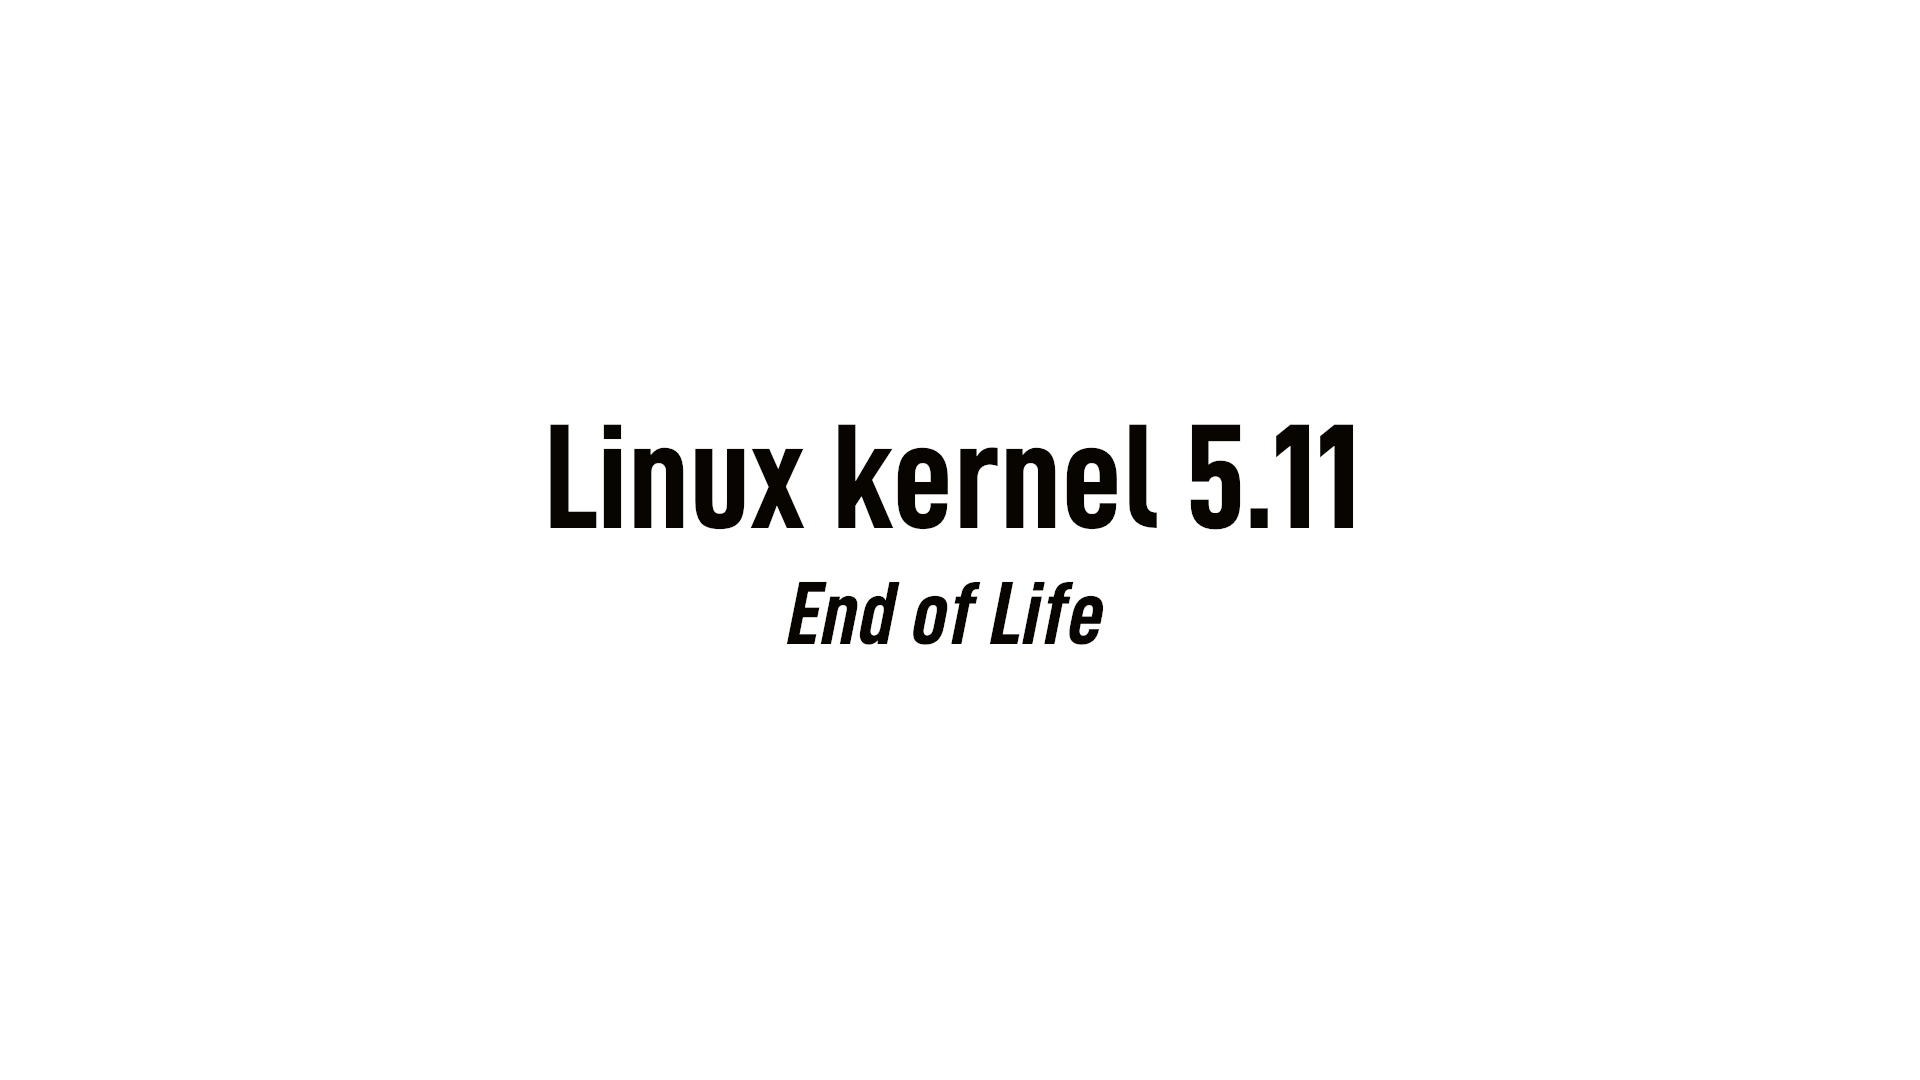 Linux Kernel 5.11 Reaches End of Life, Users Urged to Upgrade to Linux 5.12